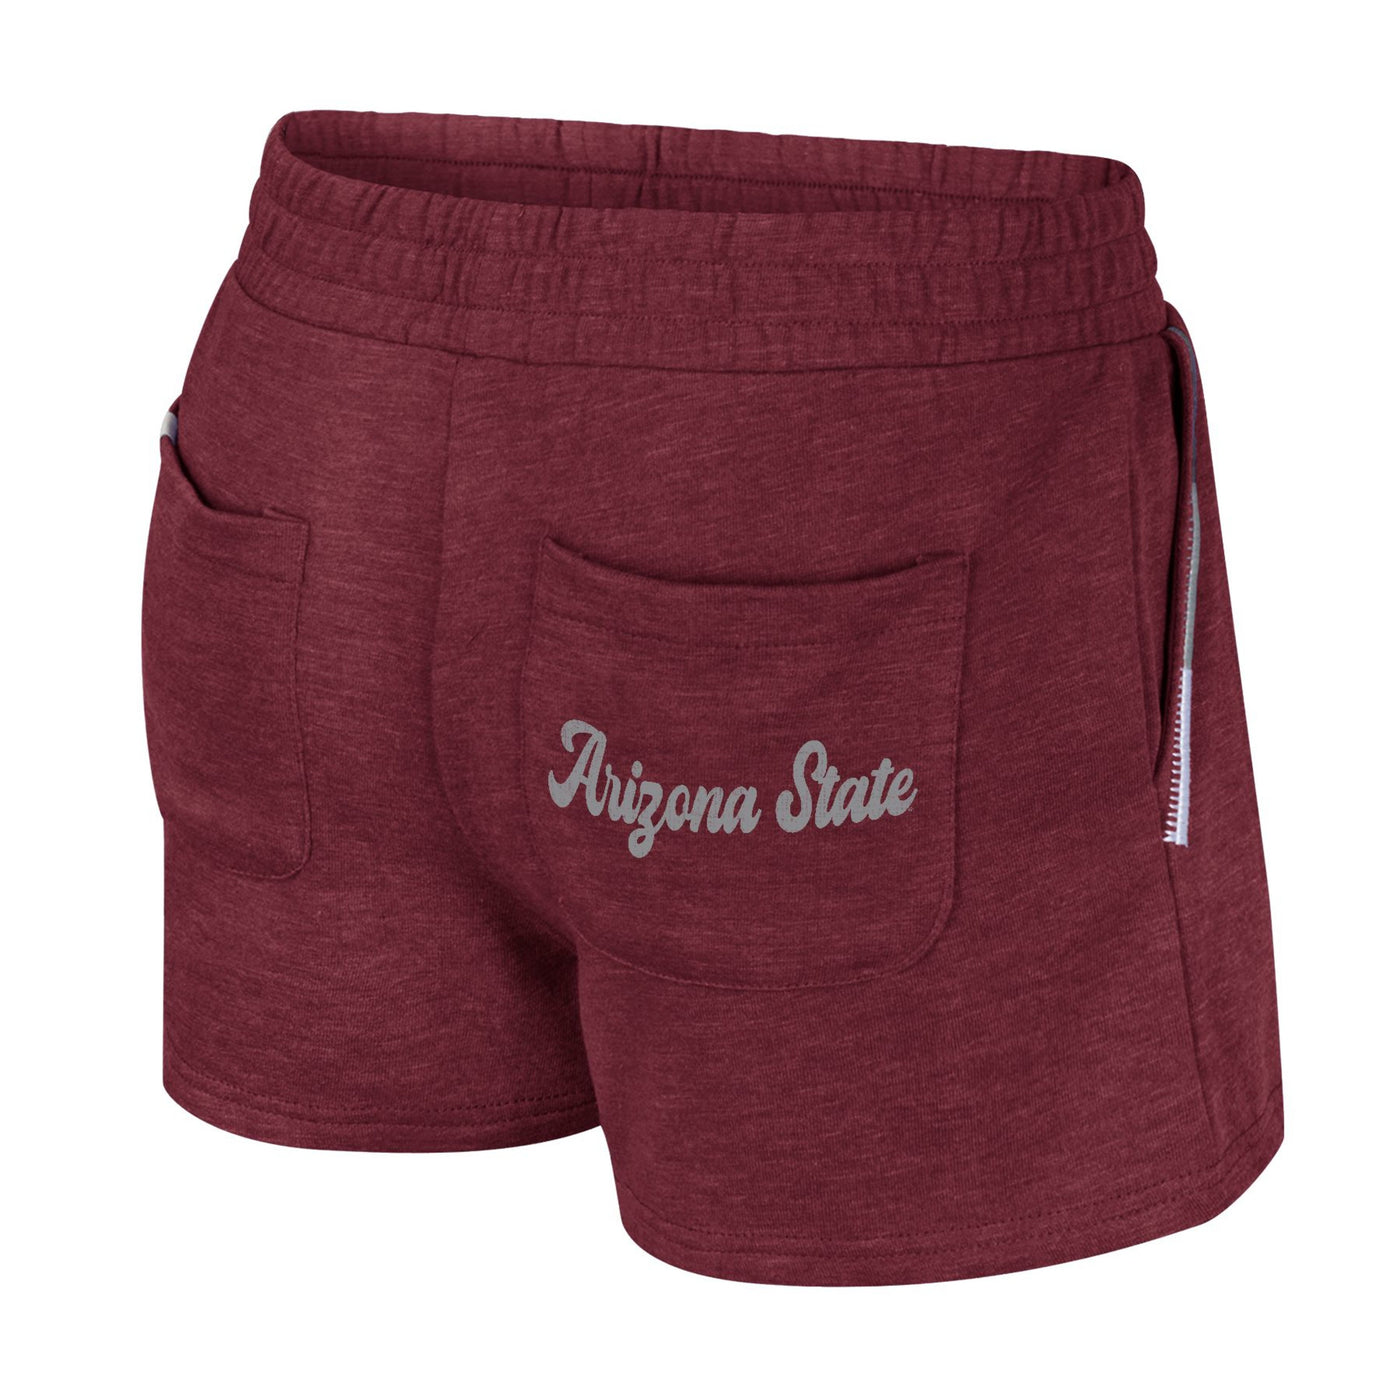 Backside of ASU maroon short with the cursive text 